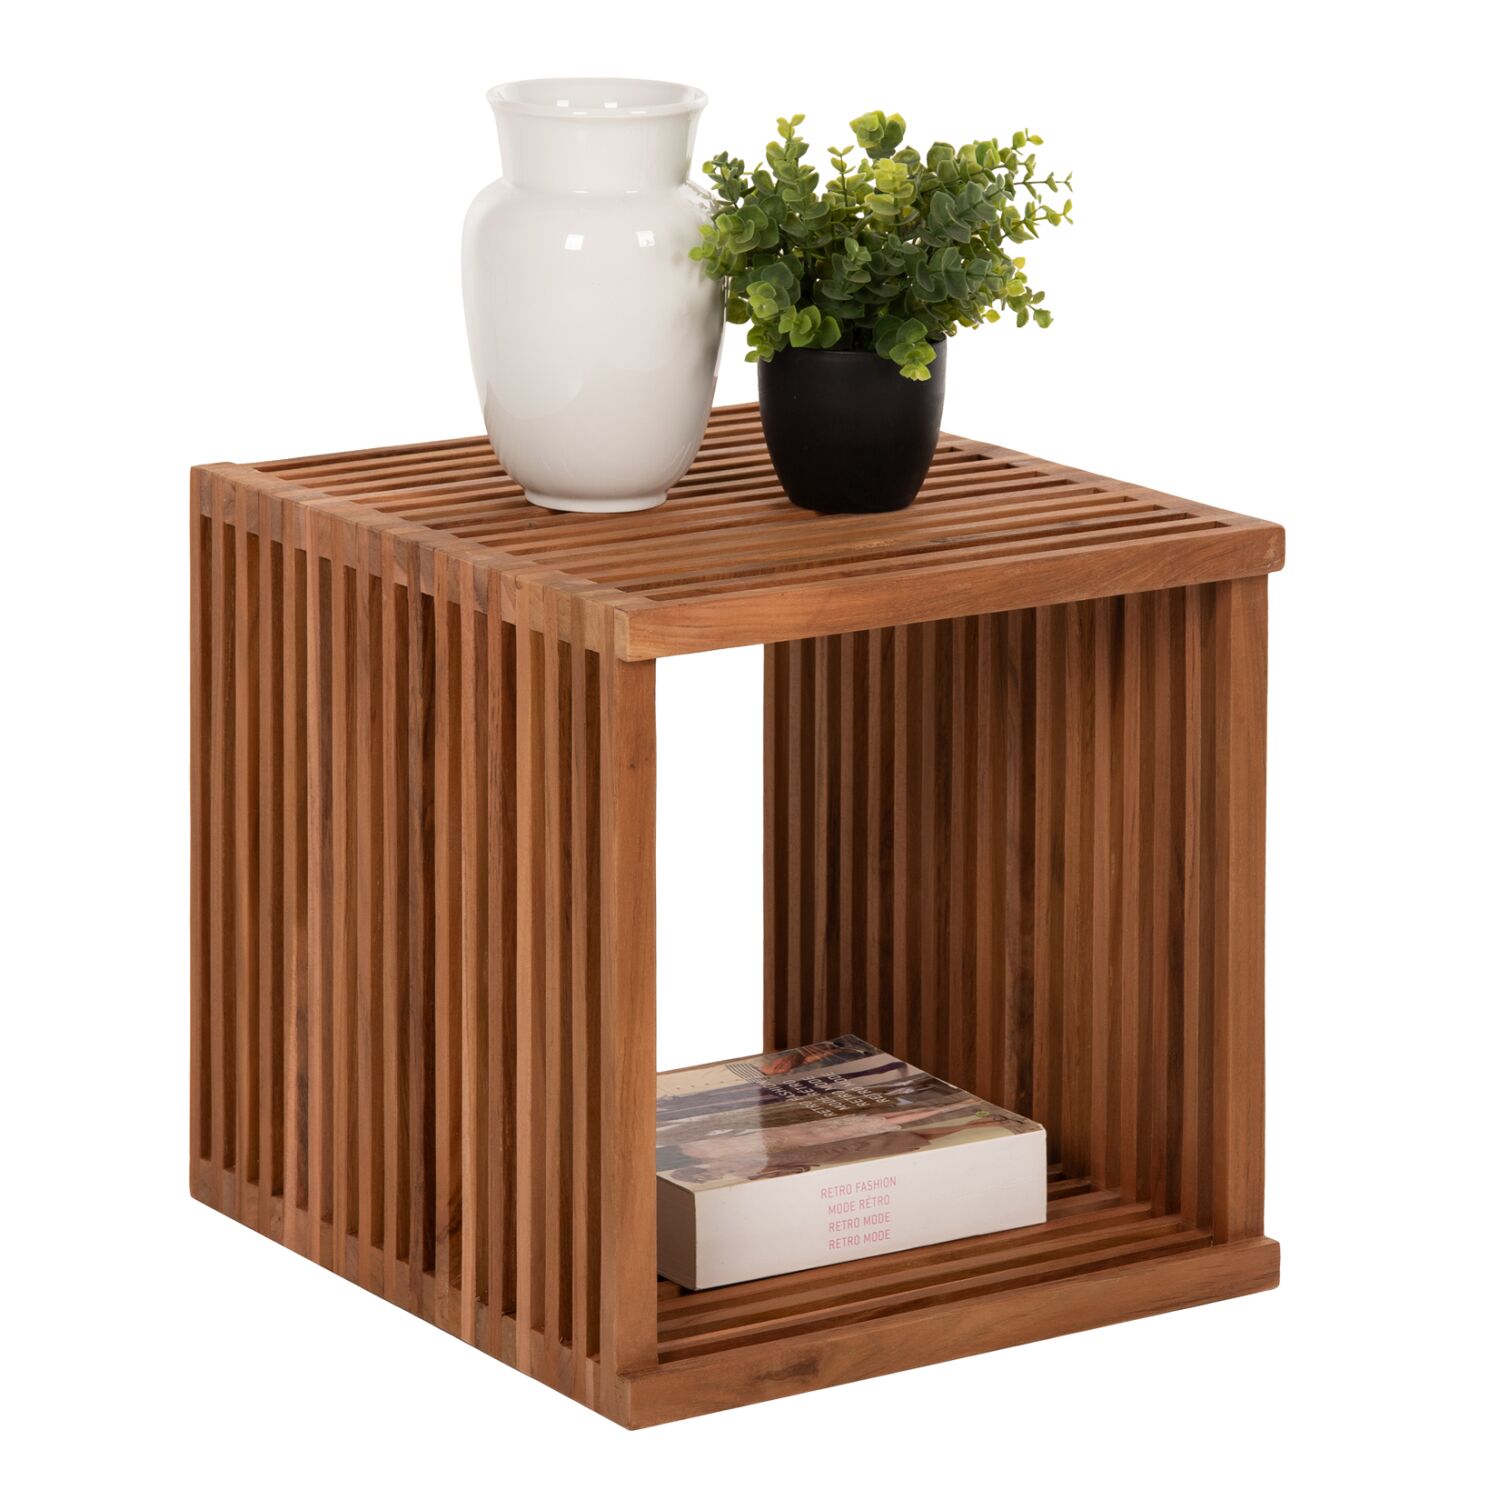 SIDE TABLE CUBE 1-PIECE MADE OF TEAK WOOD HM9482 40x40,5x40,5H cm.